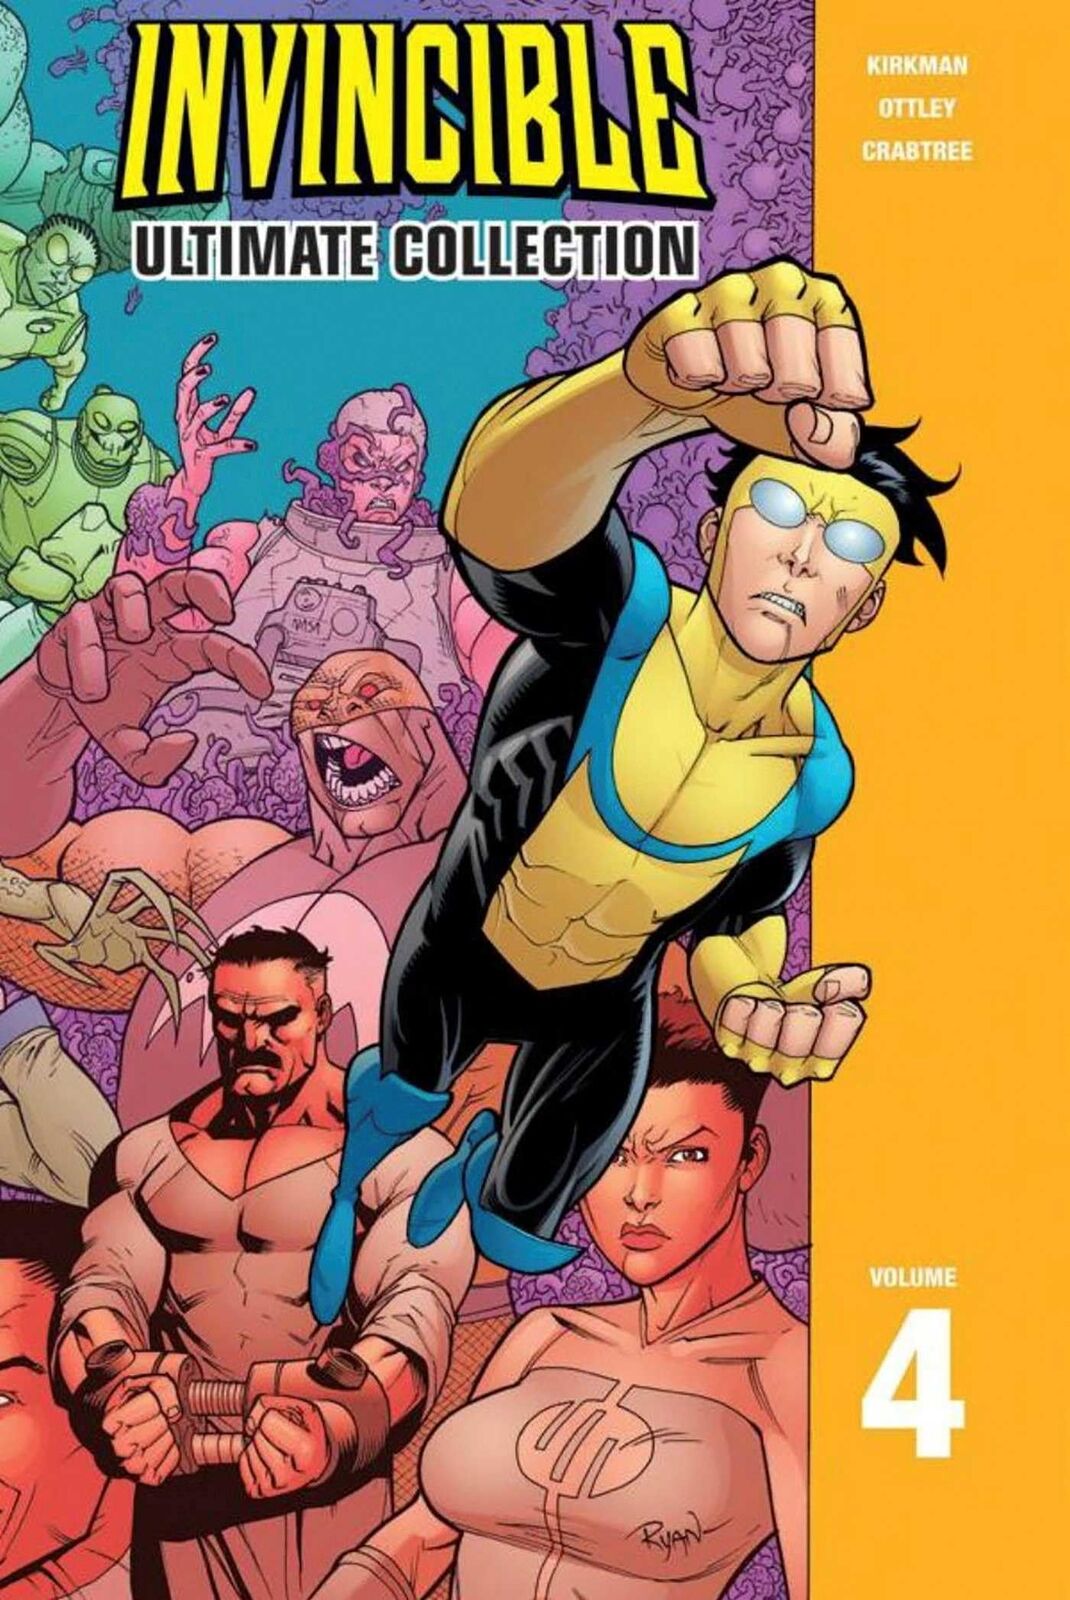 Invincible: The Ultimate Collection Volume 4 (Invincible Ultimate Collection...